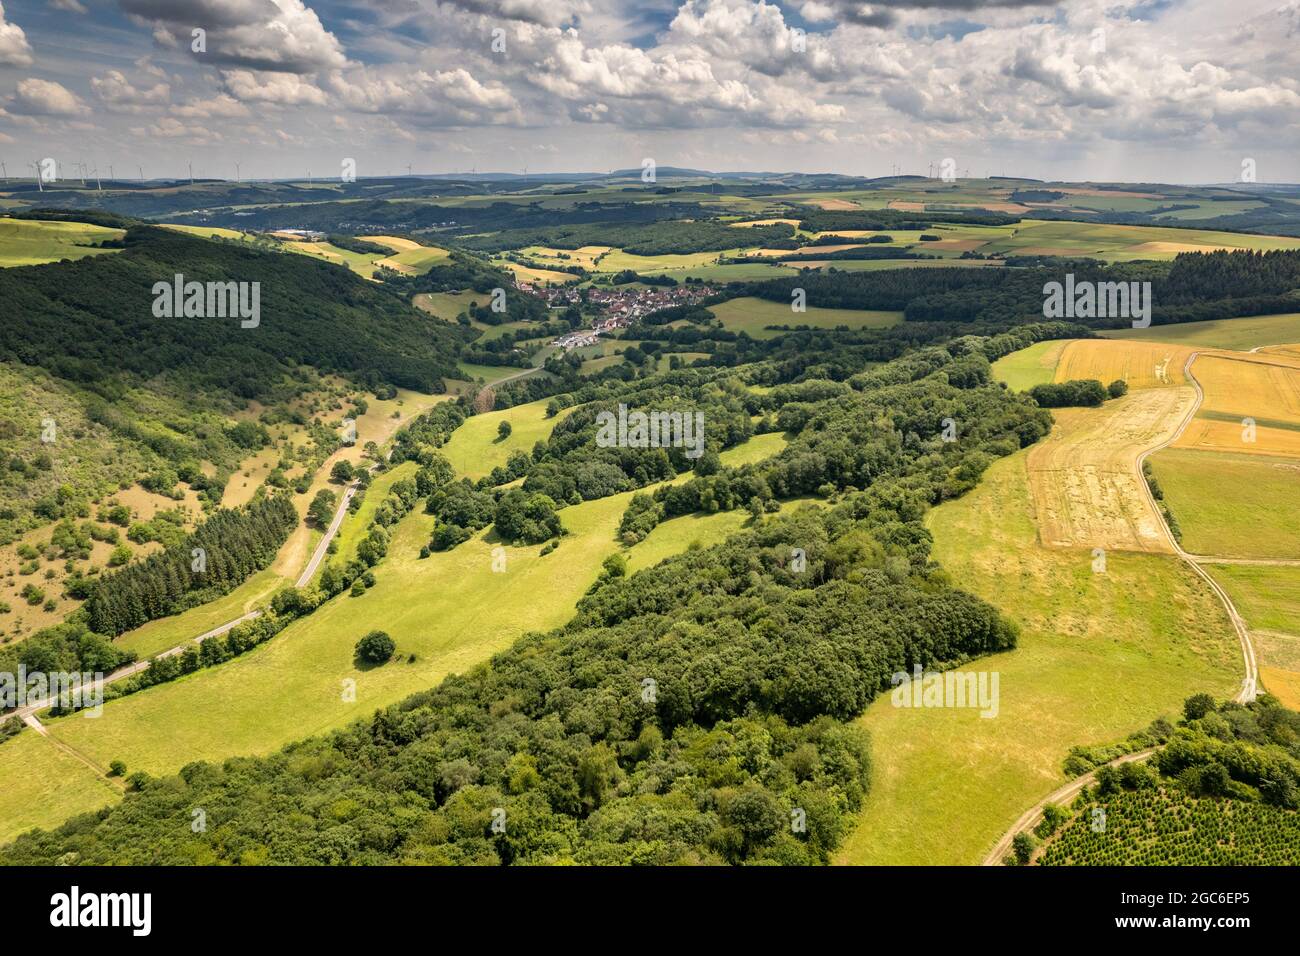 Aerial view of a landscape in Rhineland-Palatinate, Germany on the river Glan with the village Breitenheim in the background Stock Photo